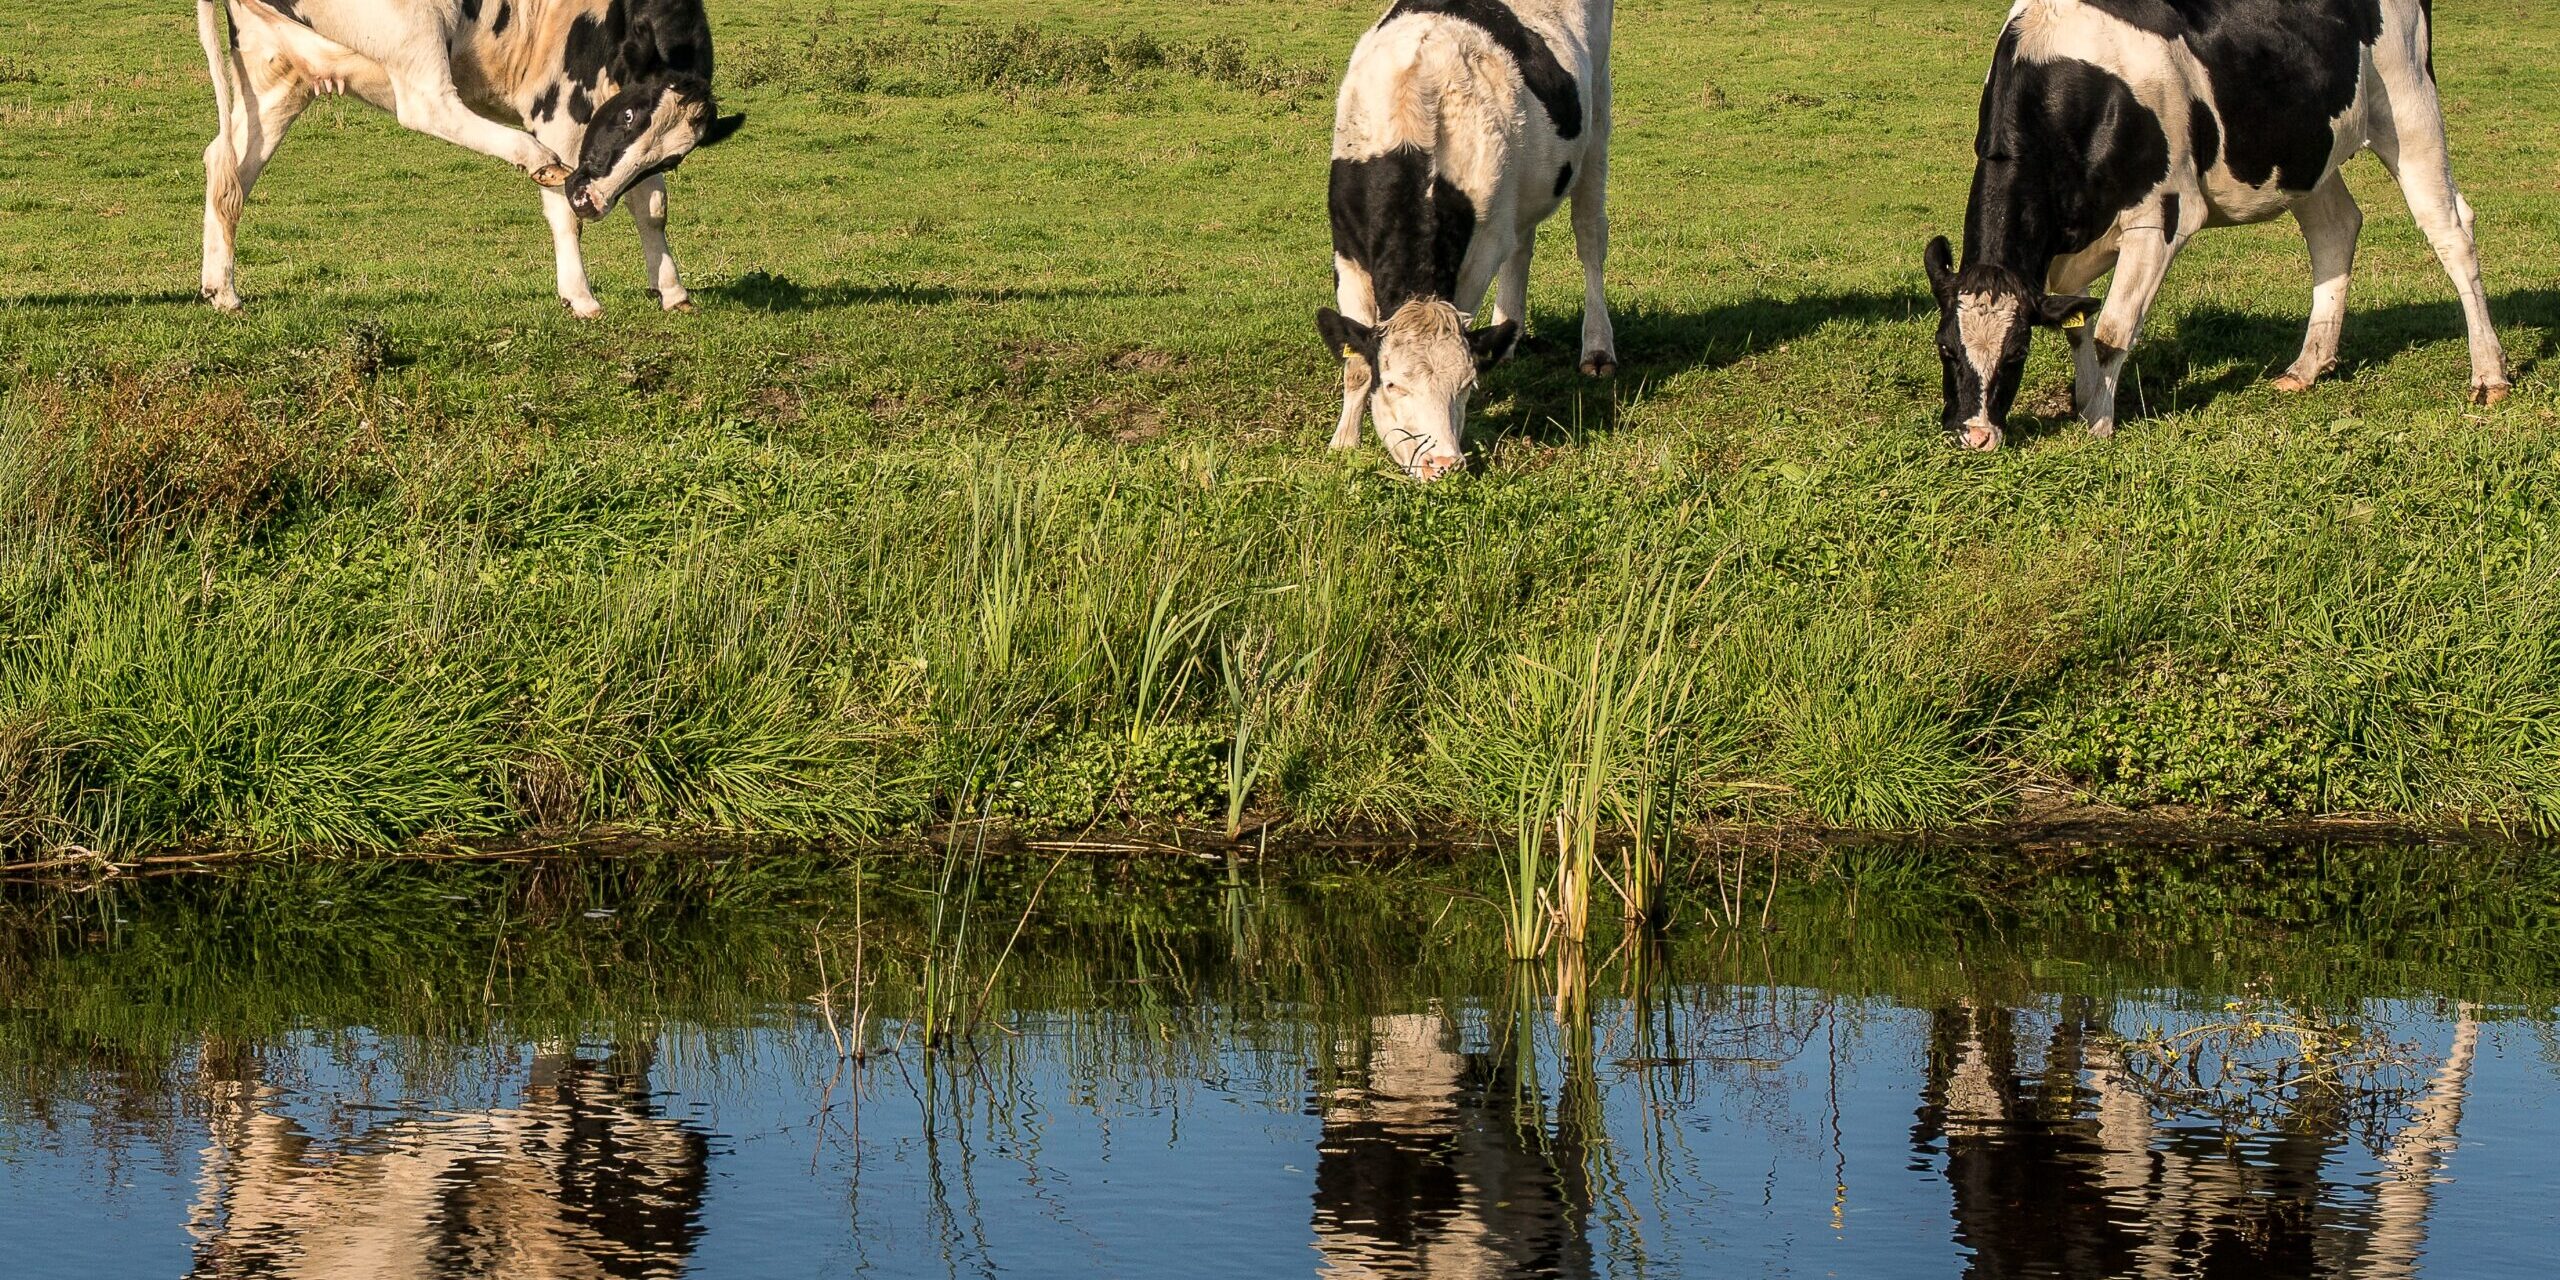 A grassy field near the water with cows eating grass at daytime